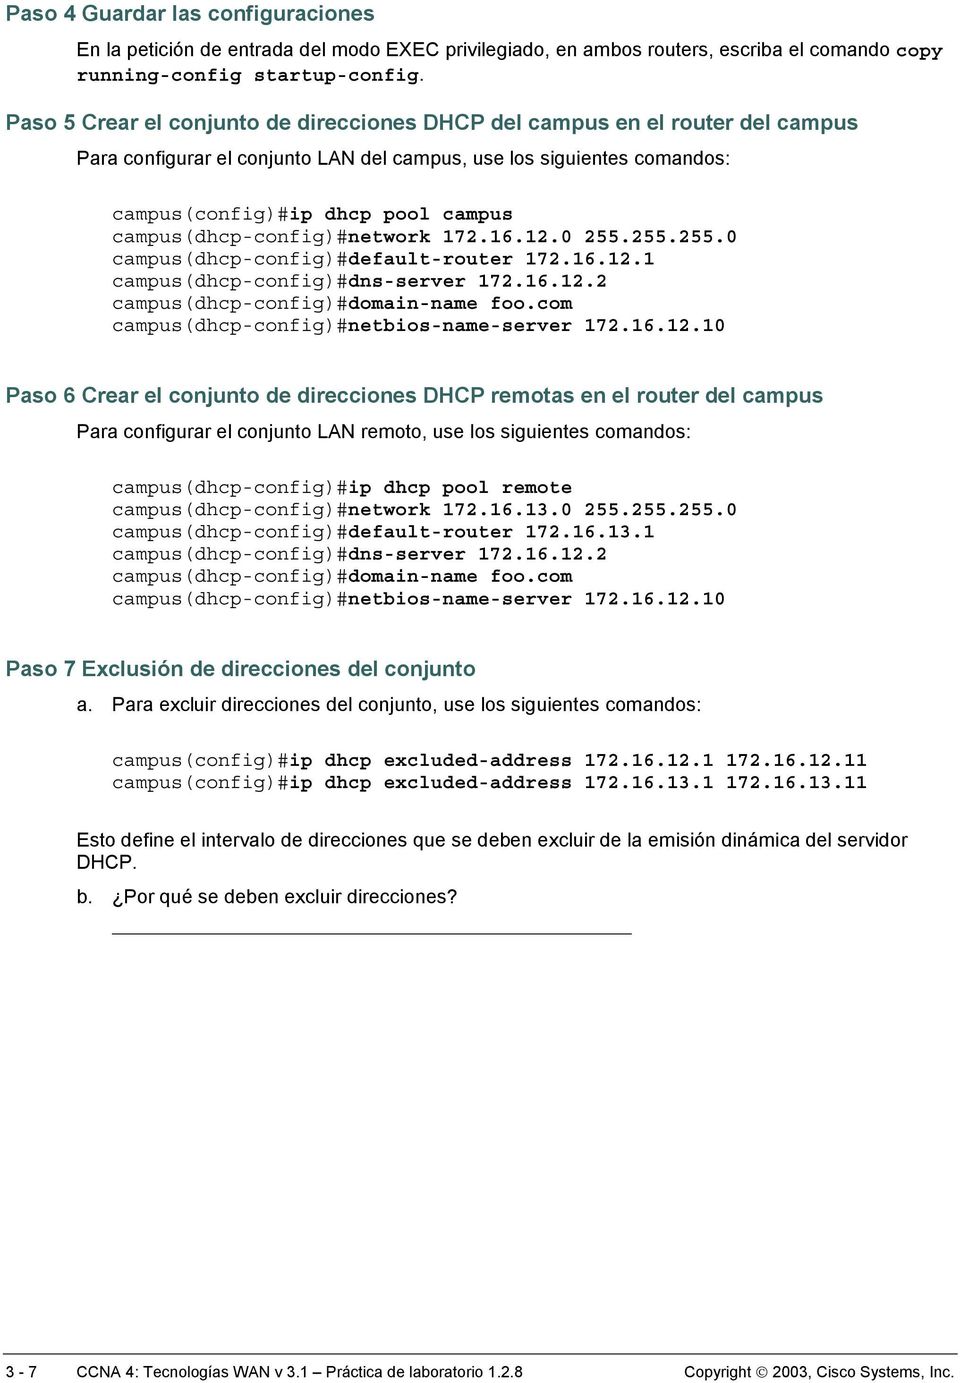 campus(dhcp-config)#network 172.16.12.0 255.255.255.0 campus(dhcp-config)#default-router 172.16.12.1 campus(dhcp-config)#dns-server 172.16.12.2 campus(dhcp-config)#domain-name foo.